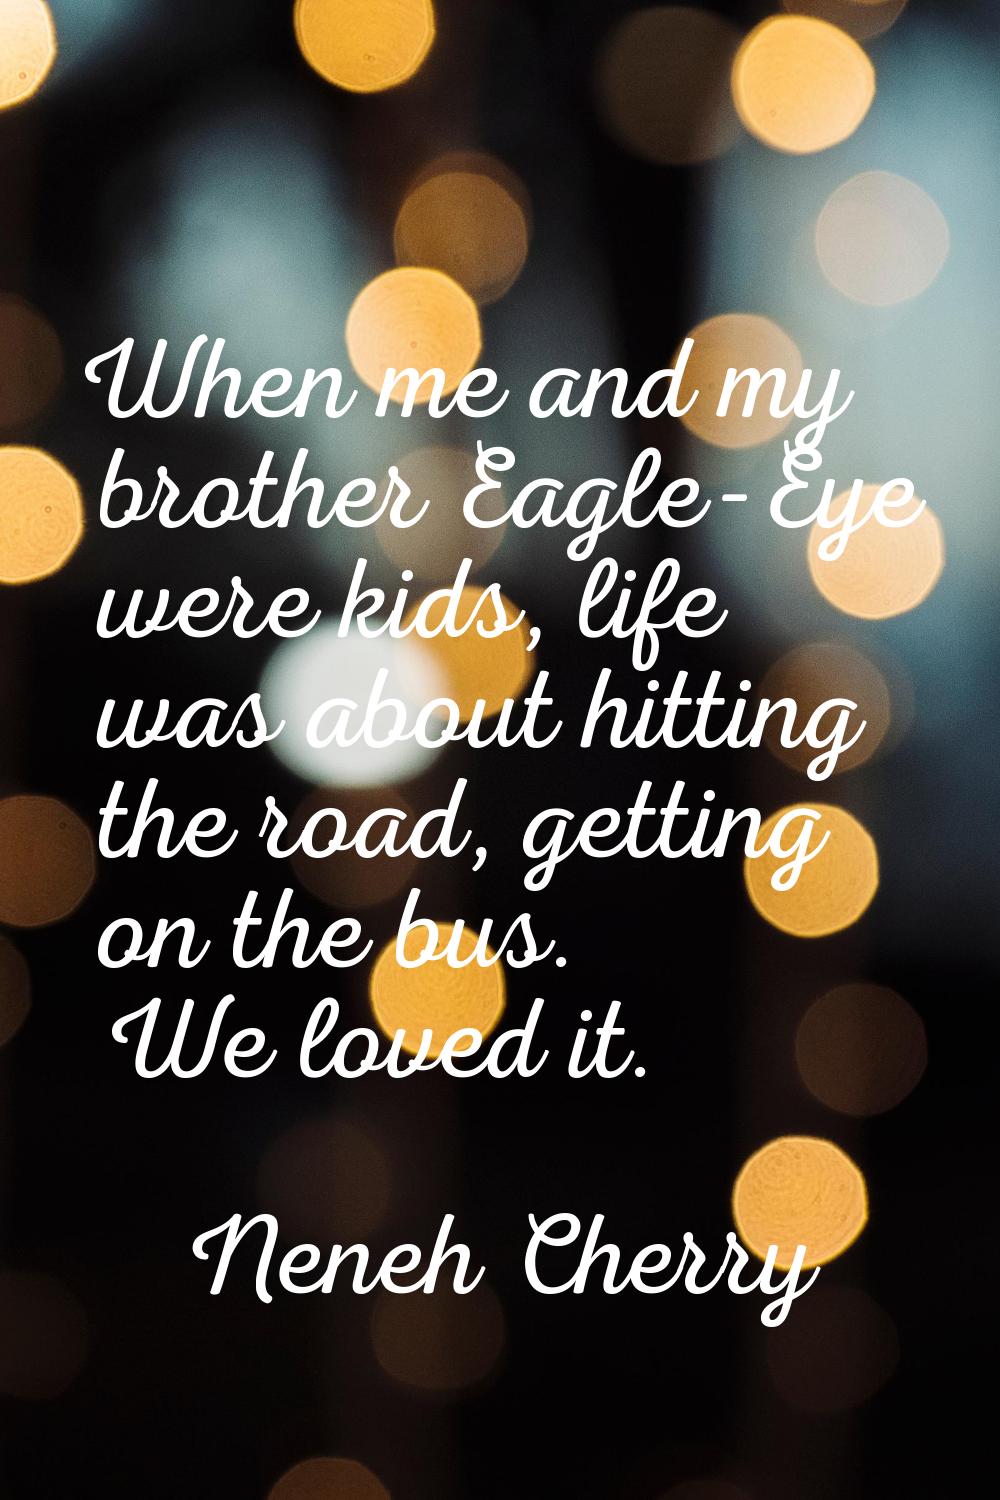 When me and my brother Eagle-Eye were kids, life was about hitting the road, getting on the bus. We